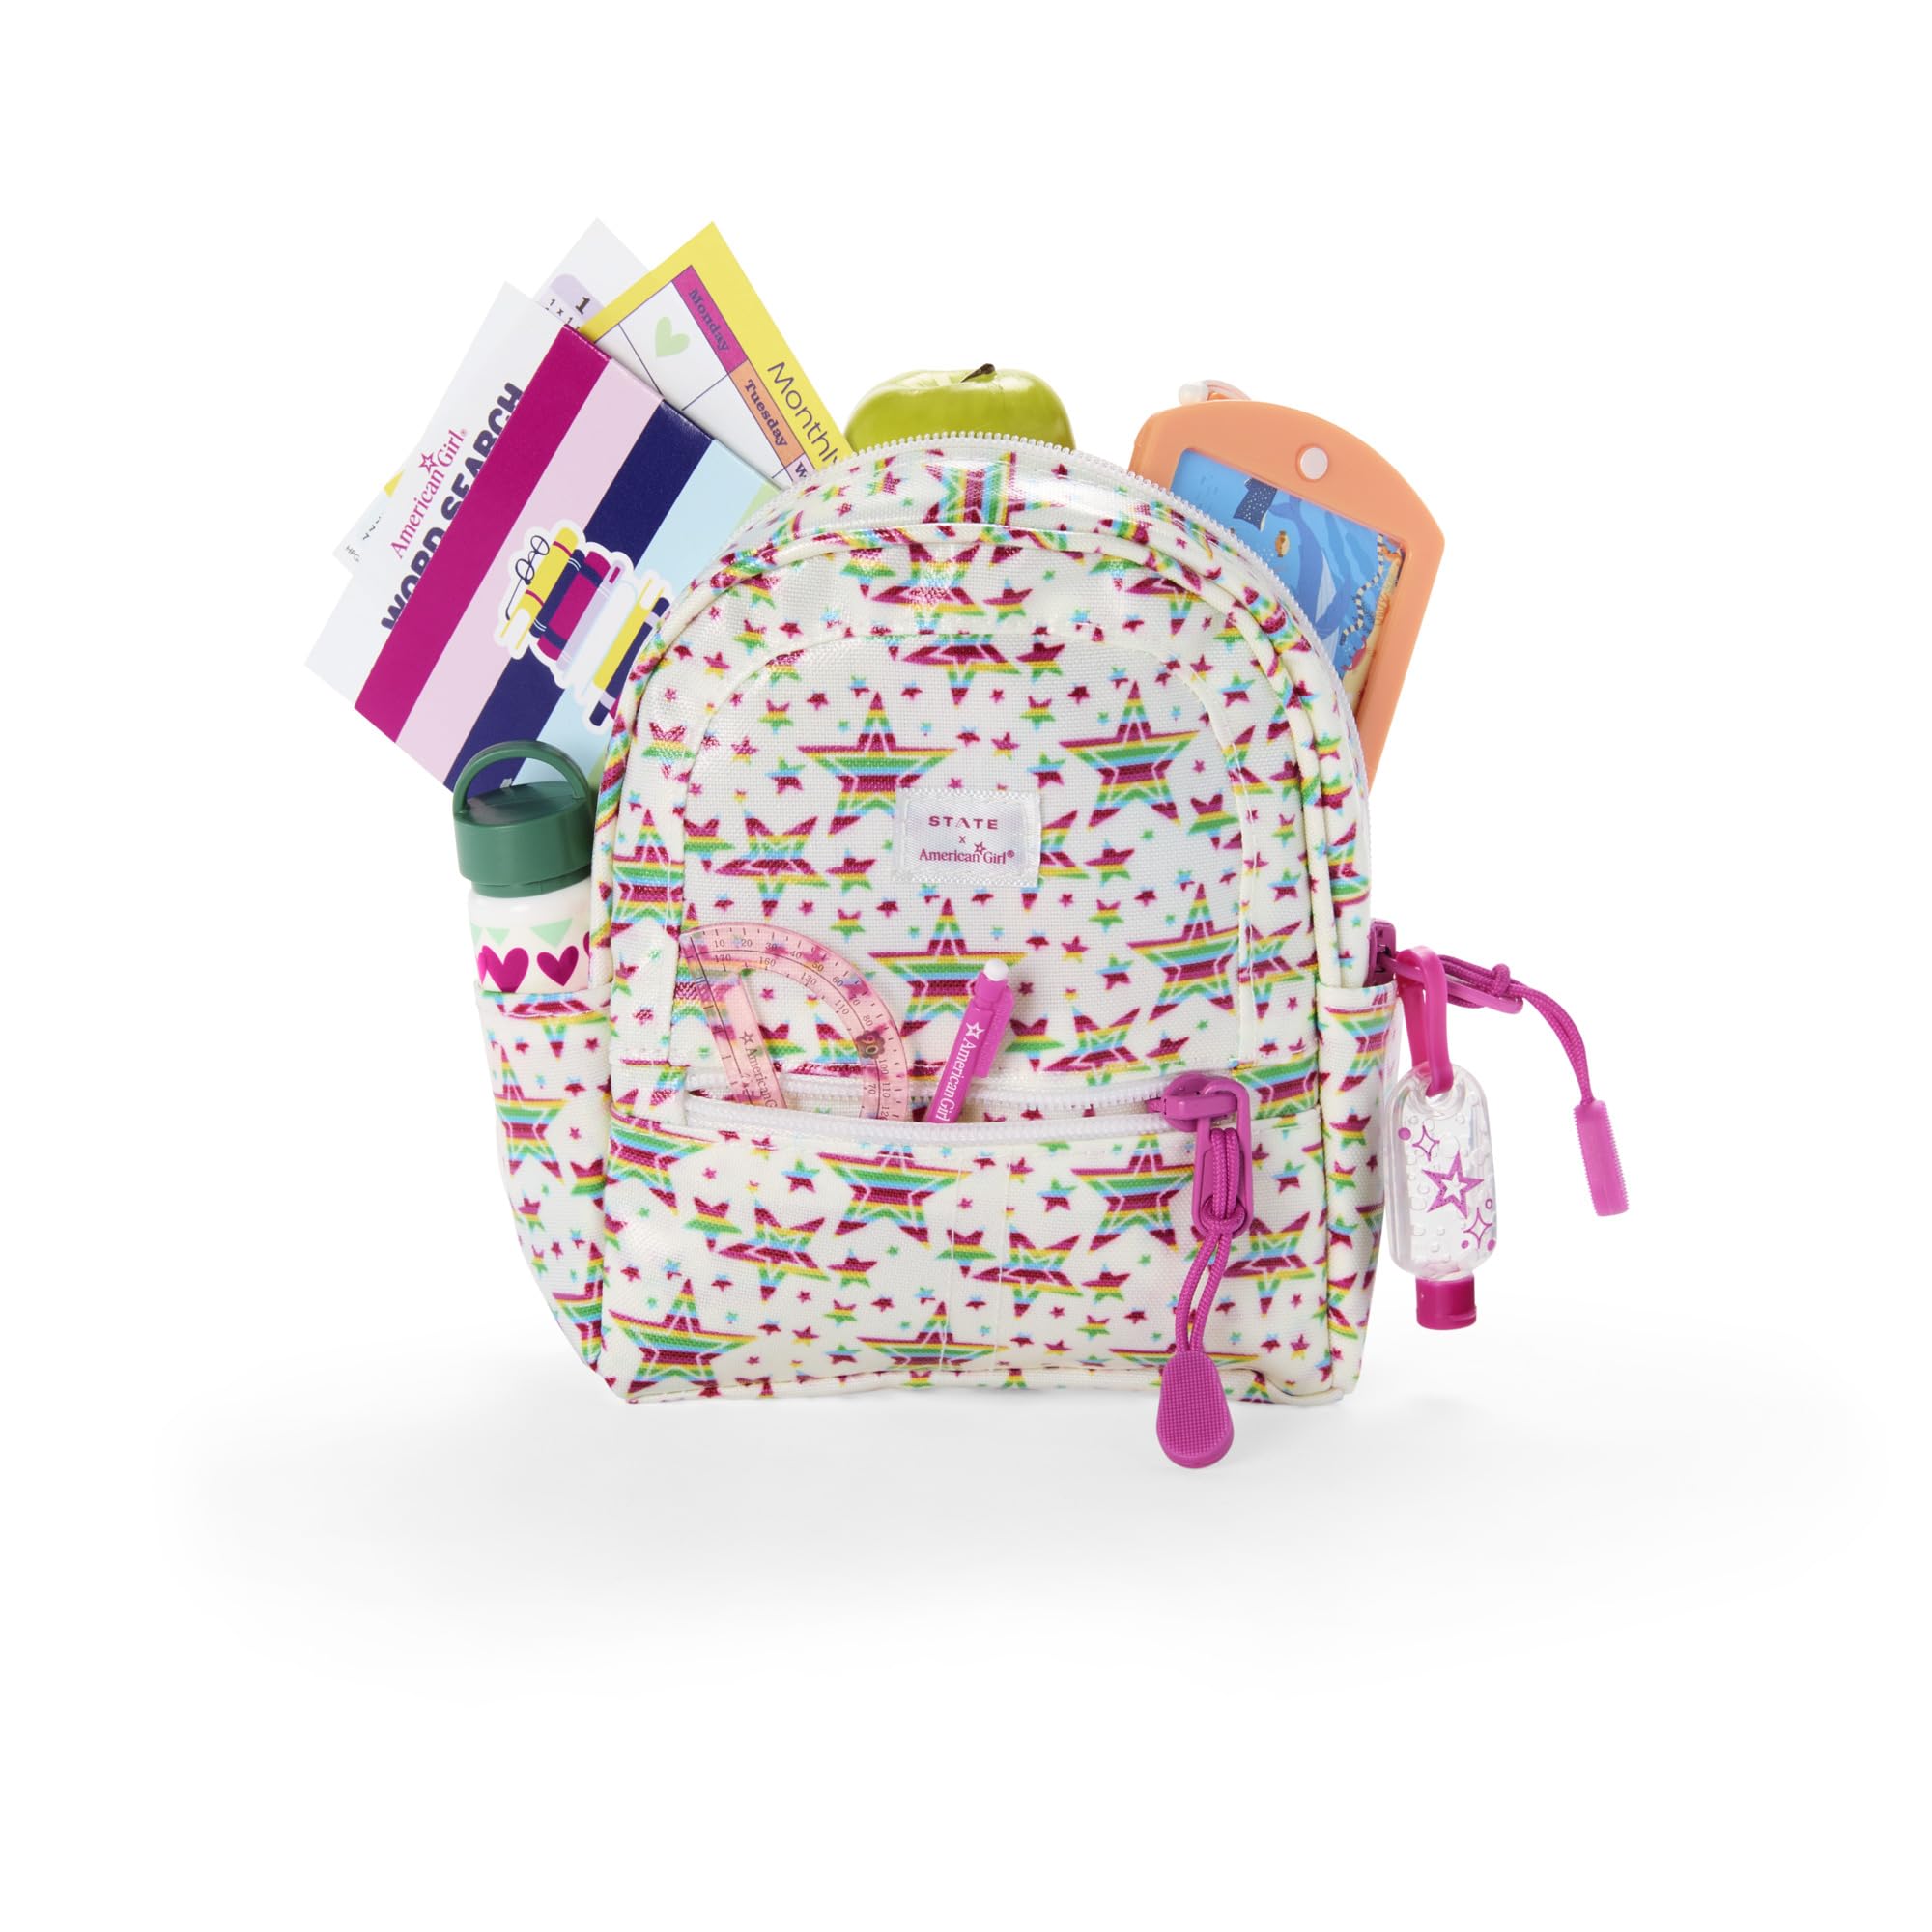 American Girl Truly Me Star Student 8-piece Backpack Set for 18-inch Dolls with rainbow star-print x STATE Bags backpack, padded shoulder straps, school accessories Ages 6+